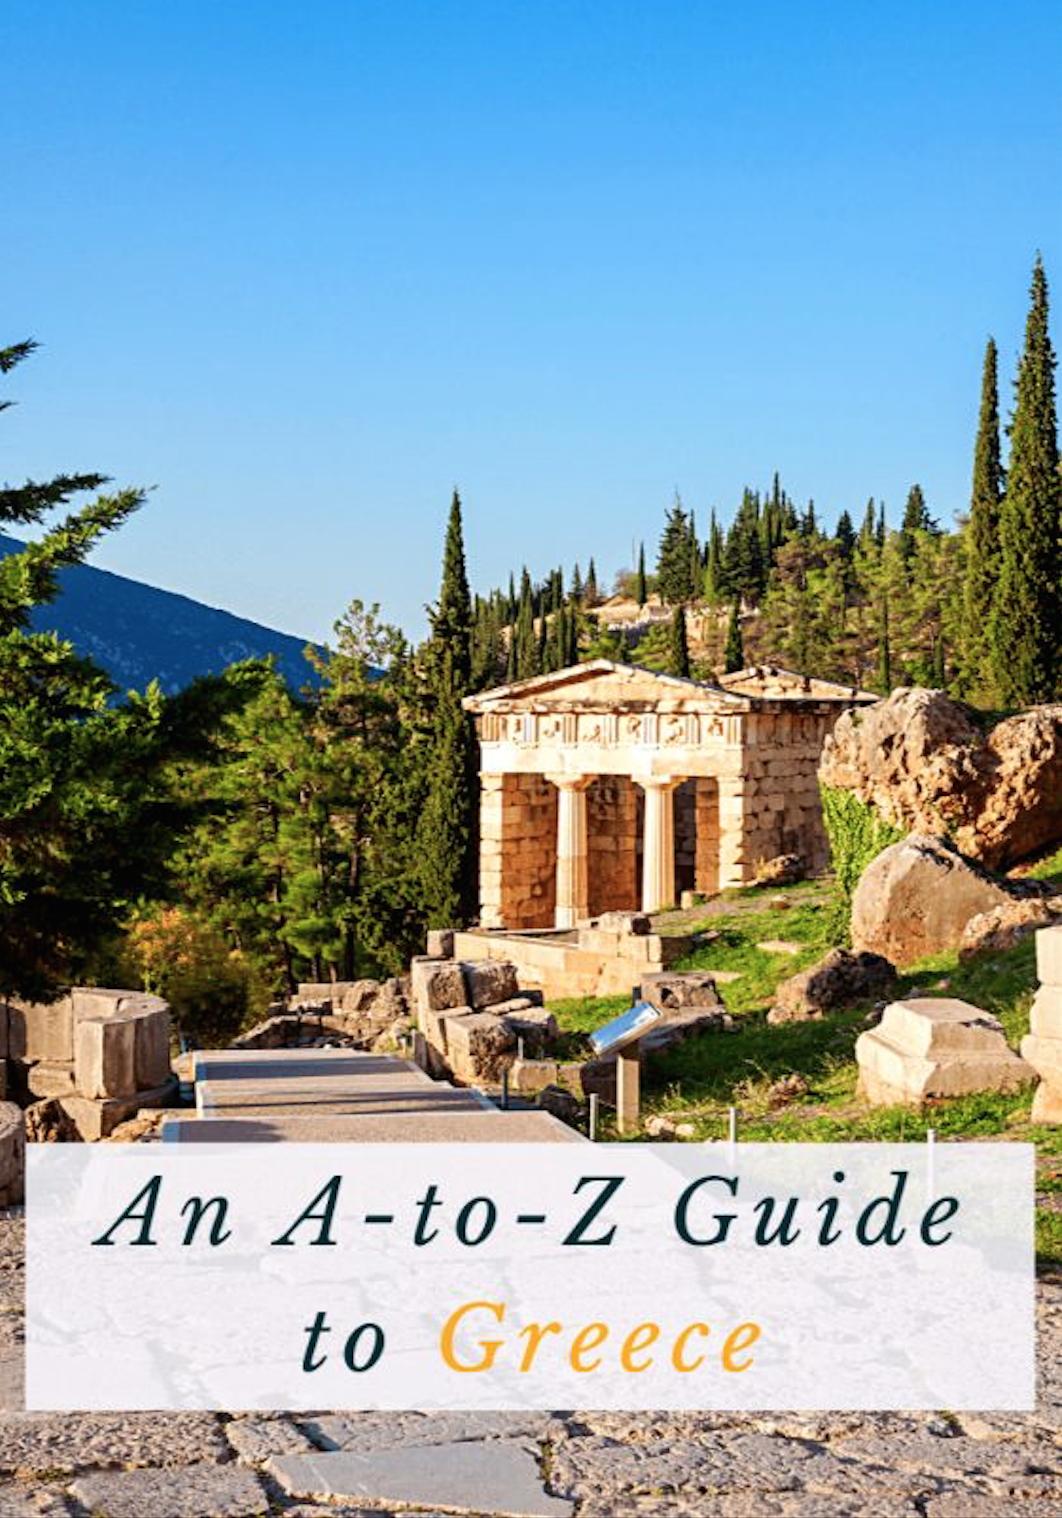 A to Z Guide to Greece (image delphi)